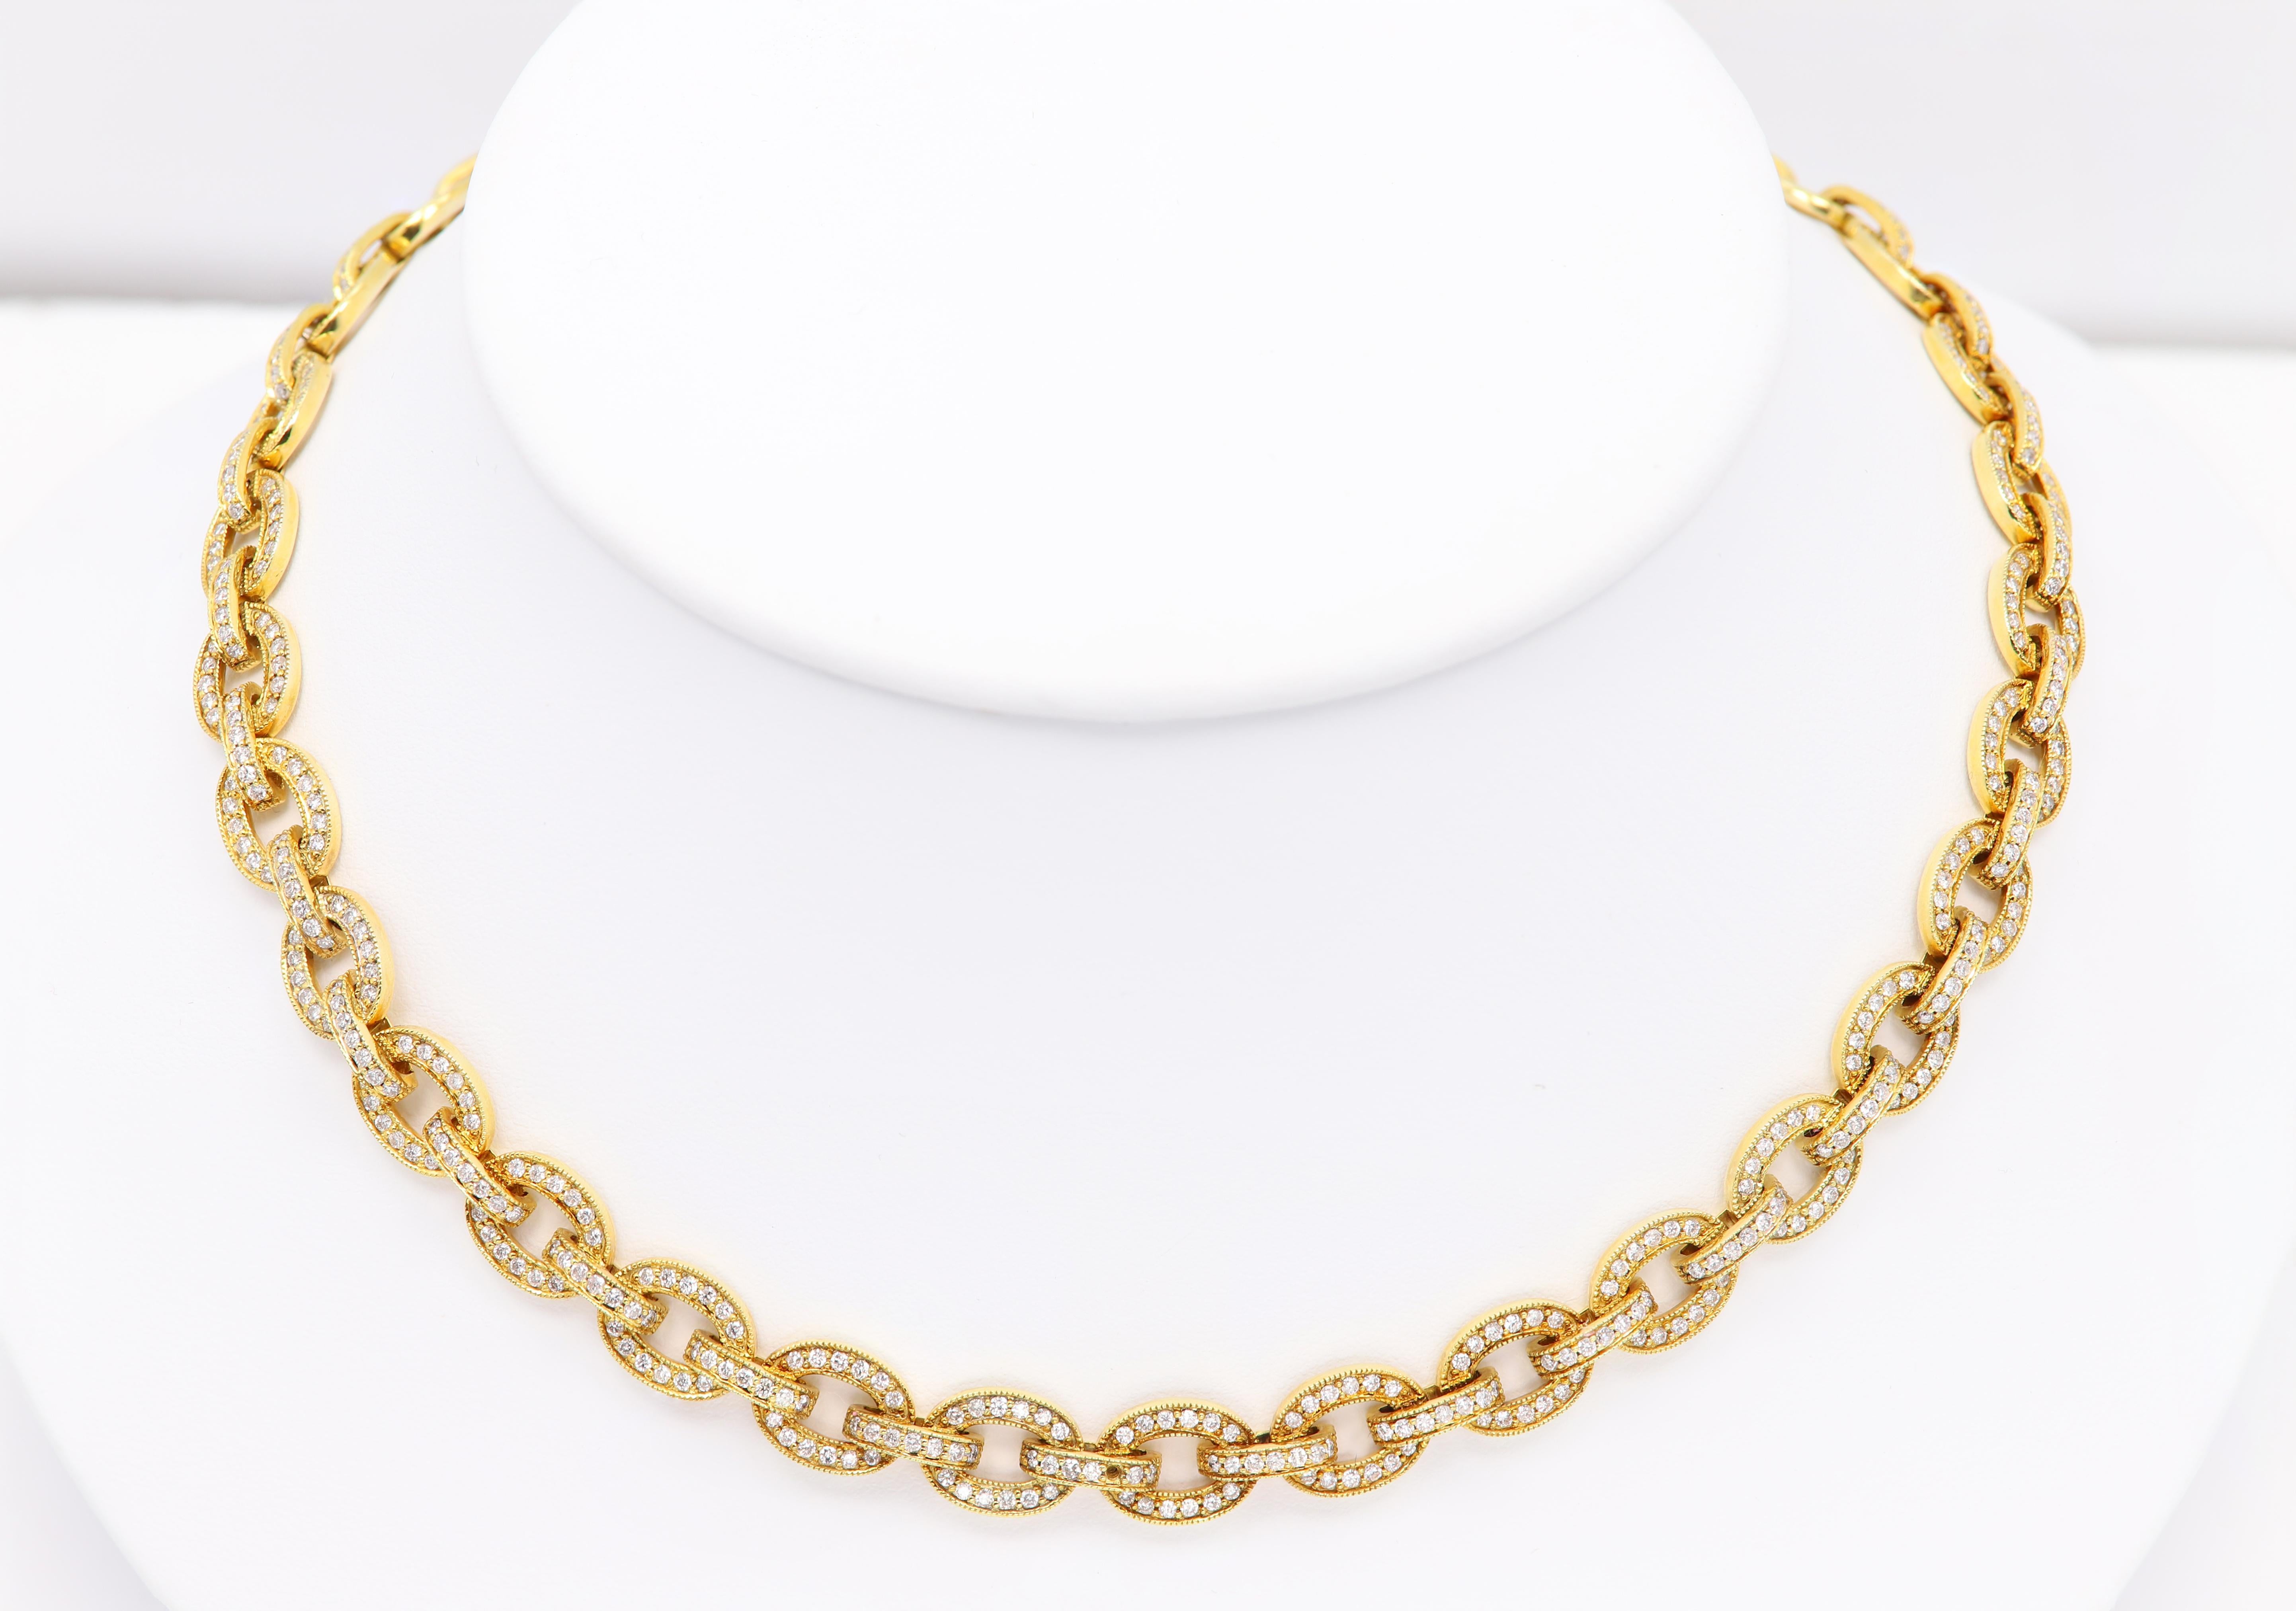 14K Yellow Gold with all Natural Diamond Necklace
Brilliant Elegant Impressive Necklace.
Cluster Prong Setting
Style: Link Chain 
Layout and the necklace rest is just perfect Combination
Total Diamonds 4.40 Carat. of GH-SI Quality
Total Weight 20